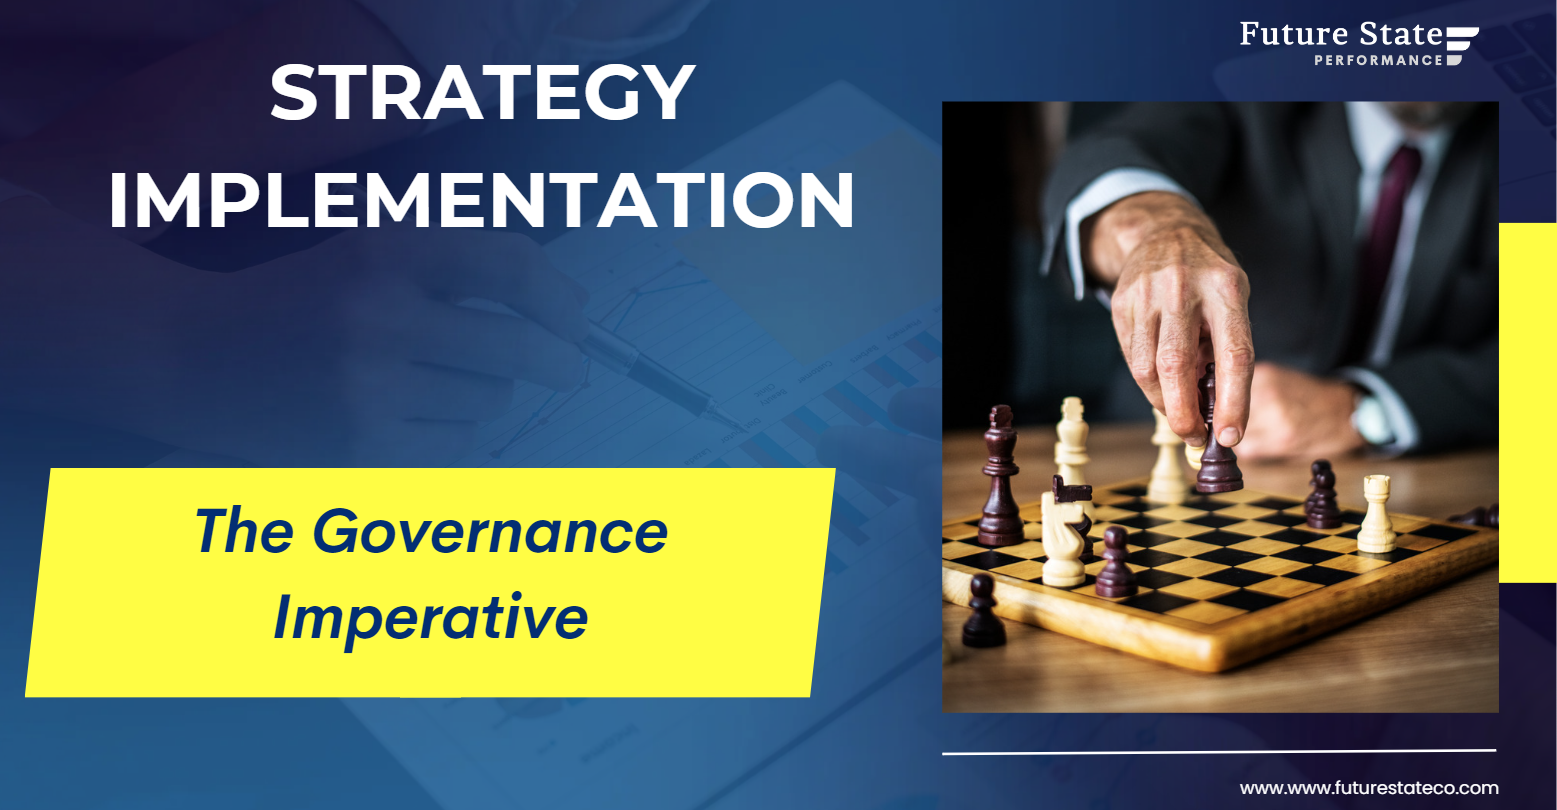 STRATEGY IMPLEMENTATION: The Governance Imperative